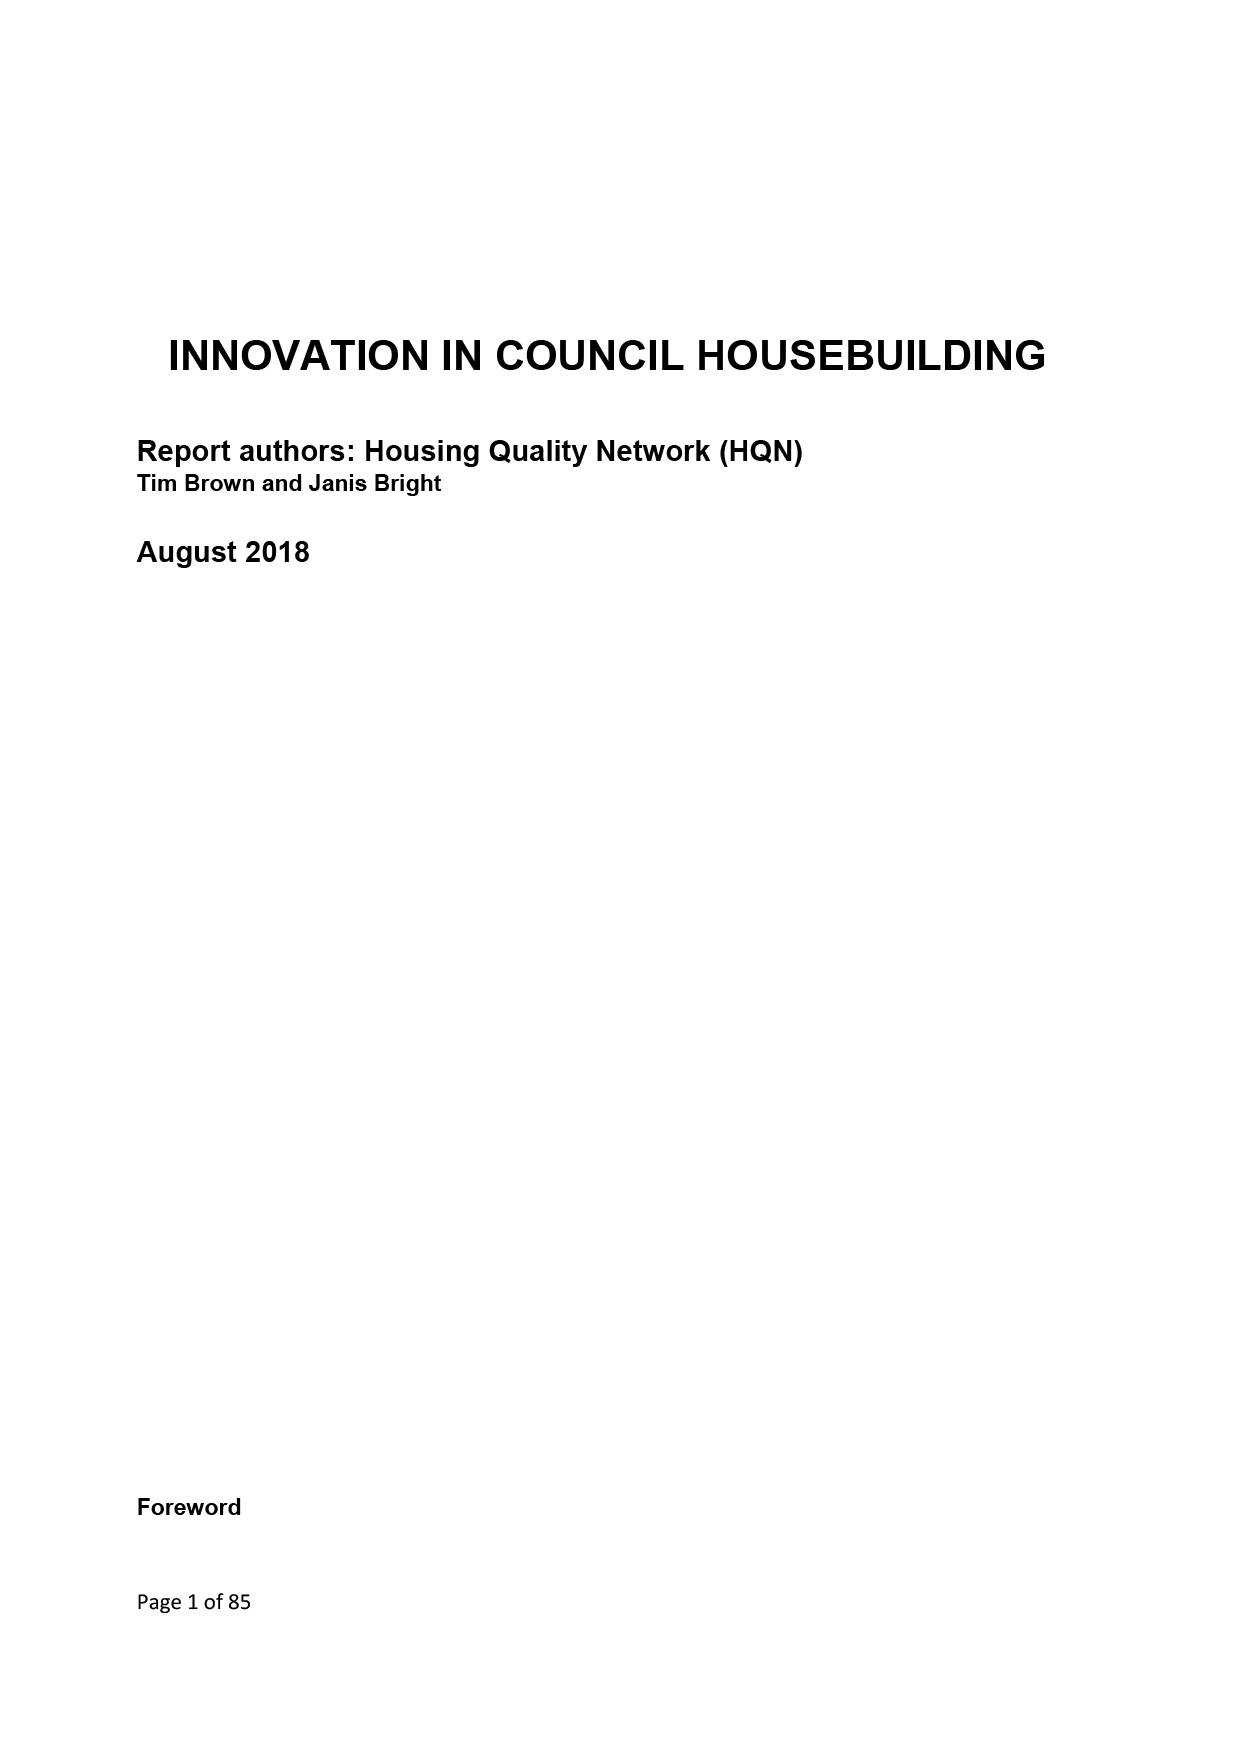 Innovation in council housebuilding